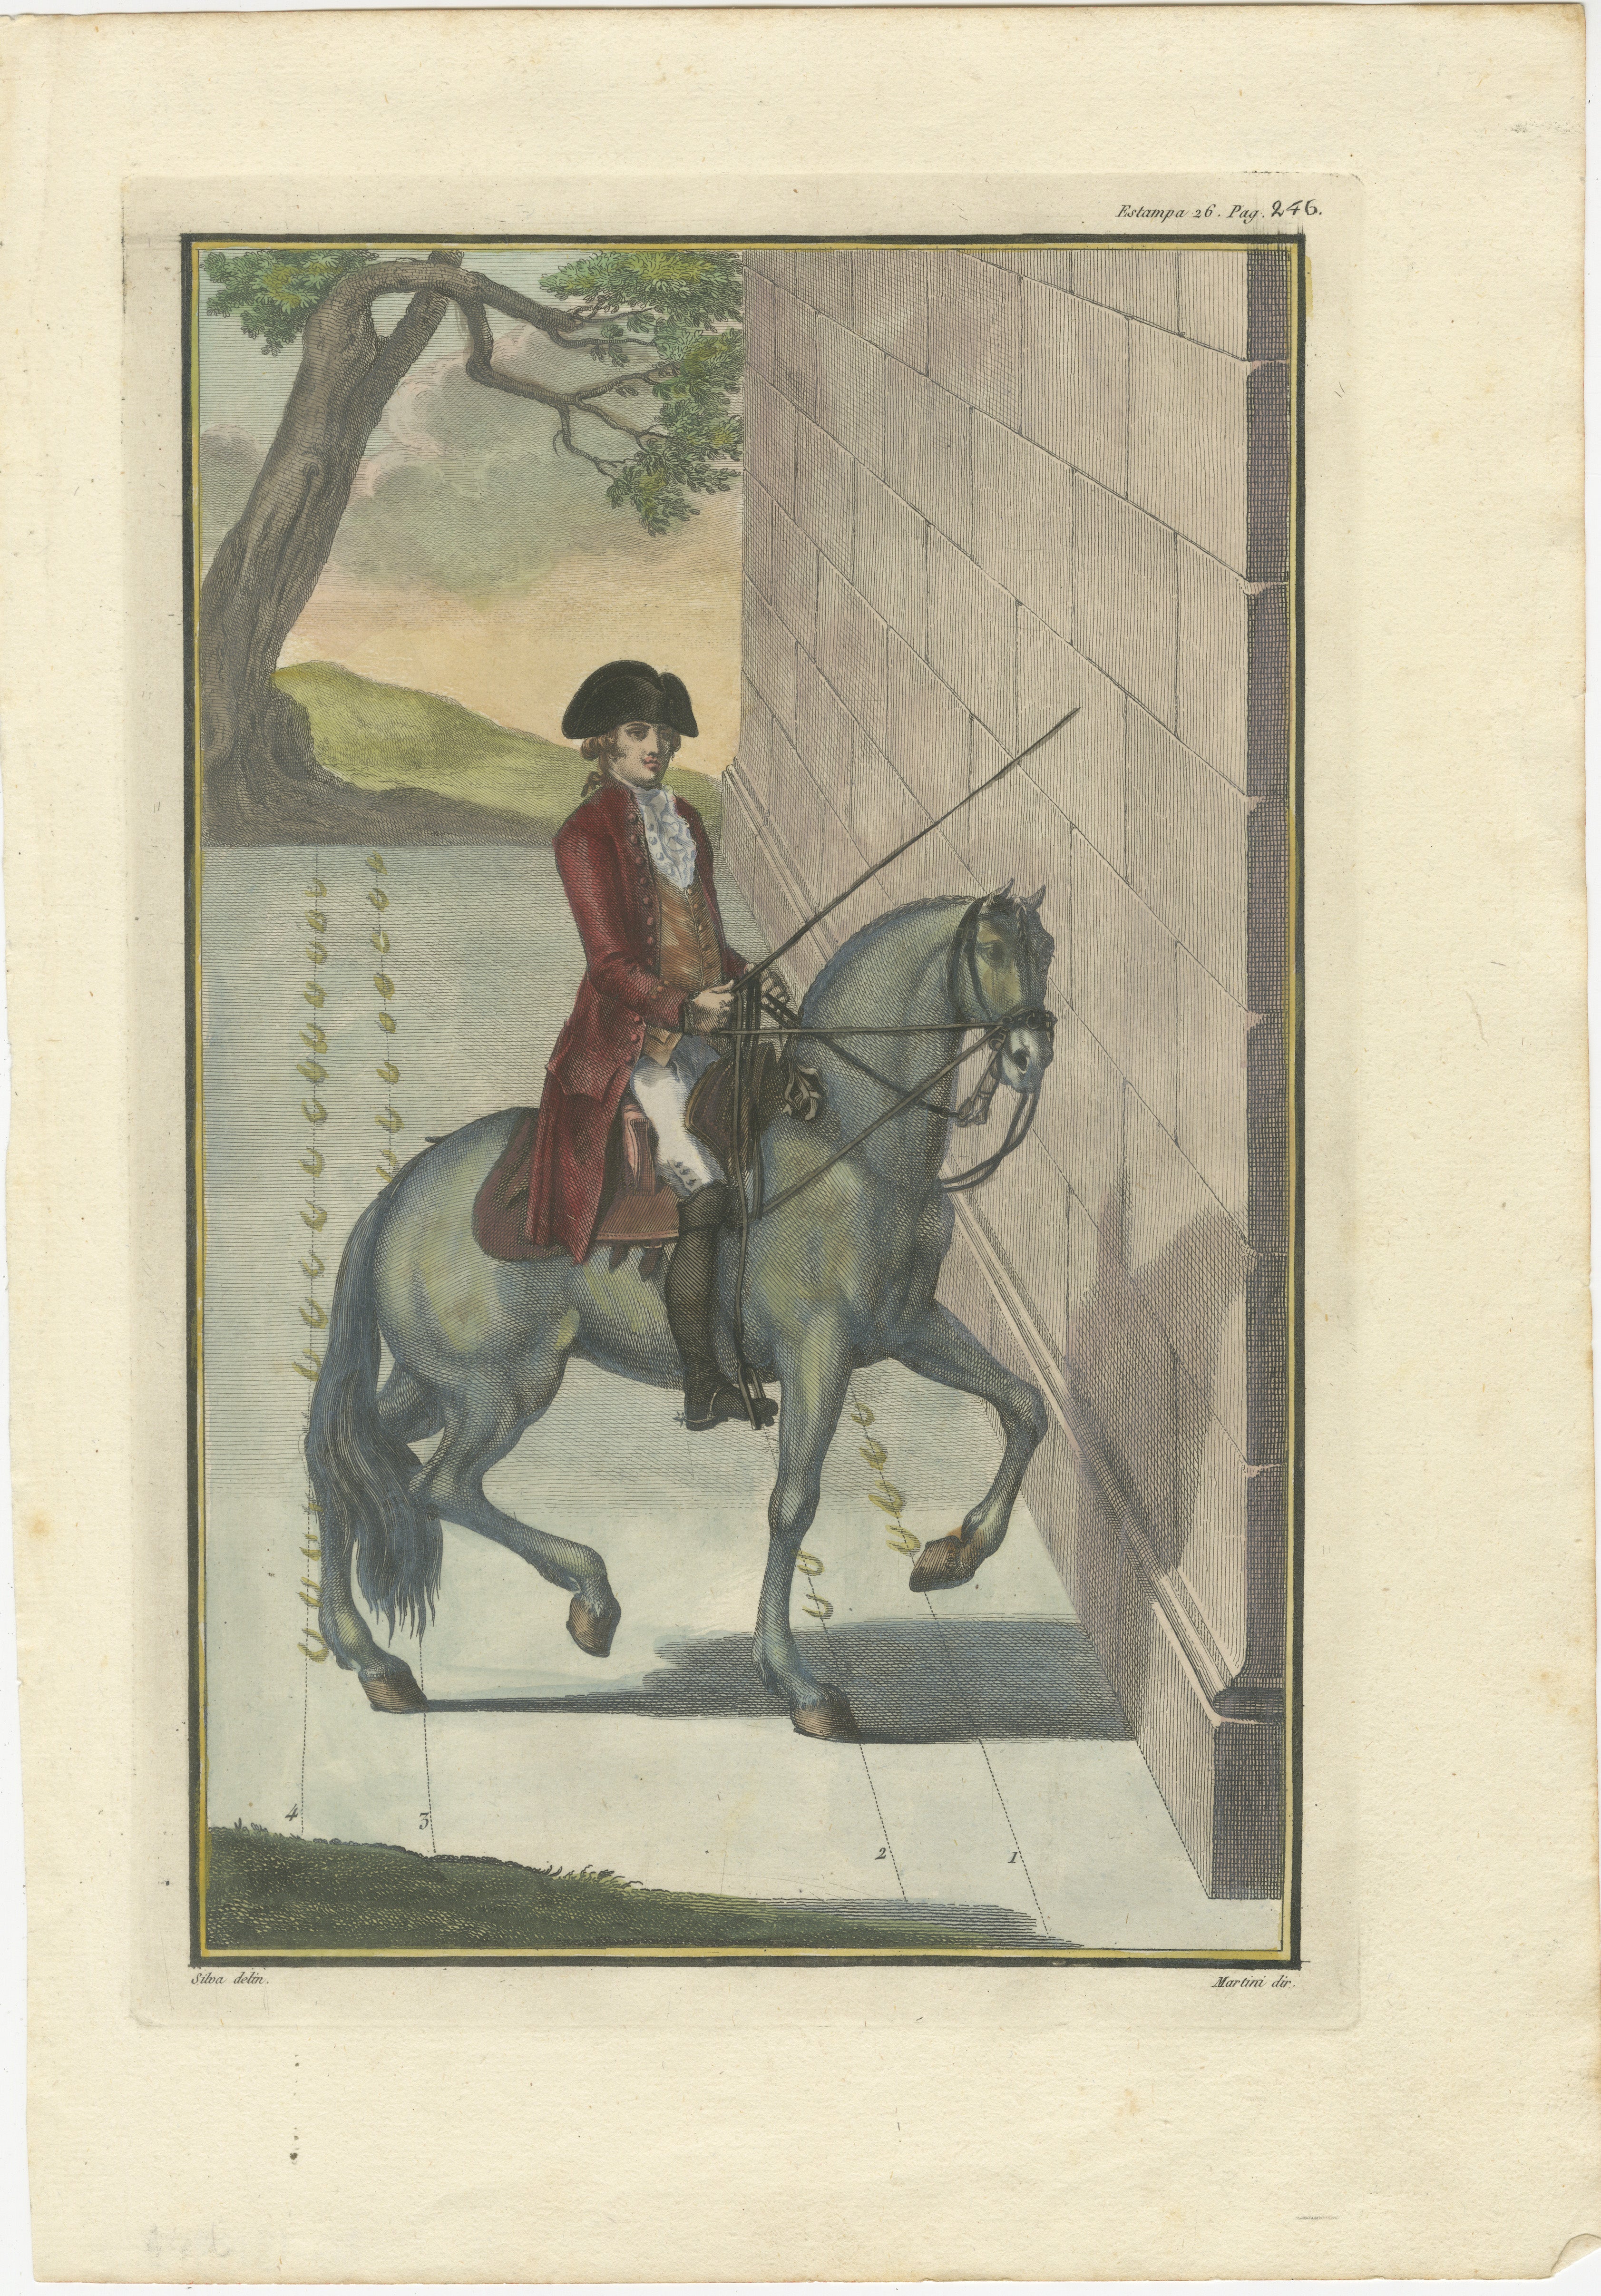 From: ‘Luz da Liberal e Nobre Arte da Cavallaria’, by Manoel Carlos de Andrade, Lisbon, Regia Officina Typographica, 1790. This work on riding and horsemanship was the first book on the subject of this magnitude. Andrade (1755-1817) focusses on